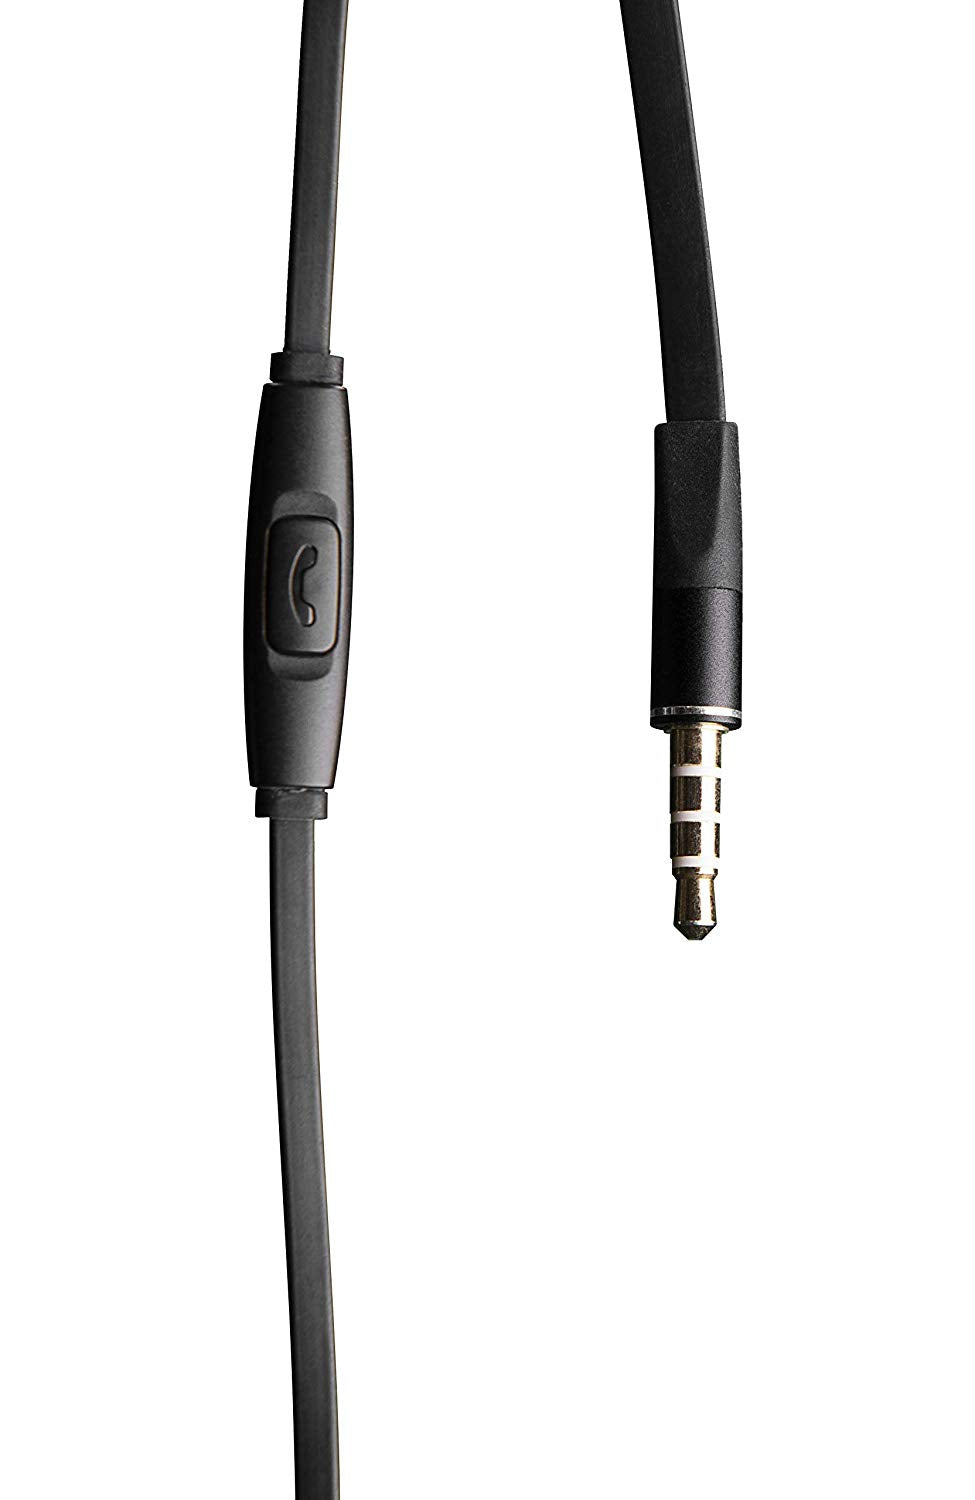 Mackie CR Buds High Performance Earphones with Mic and Control